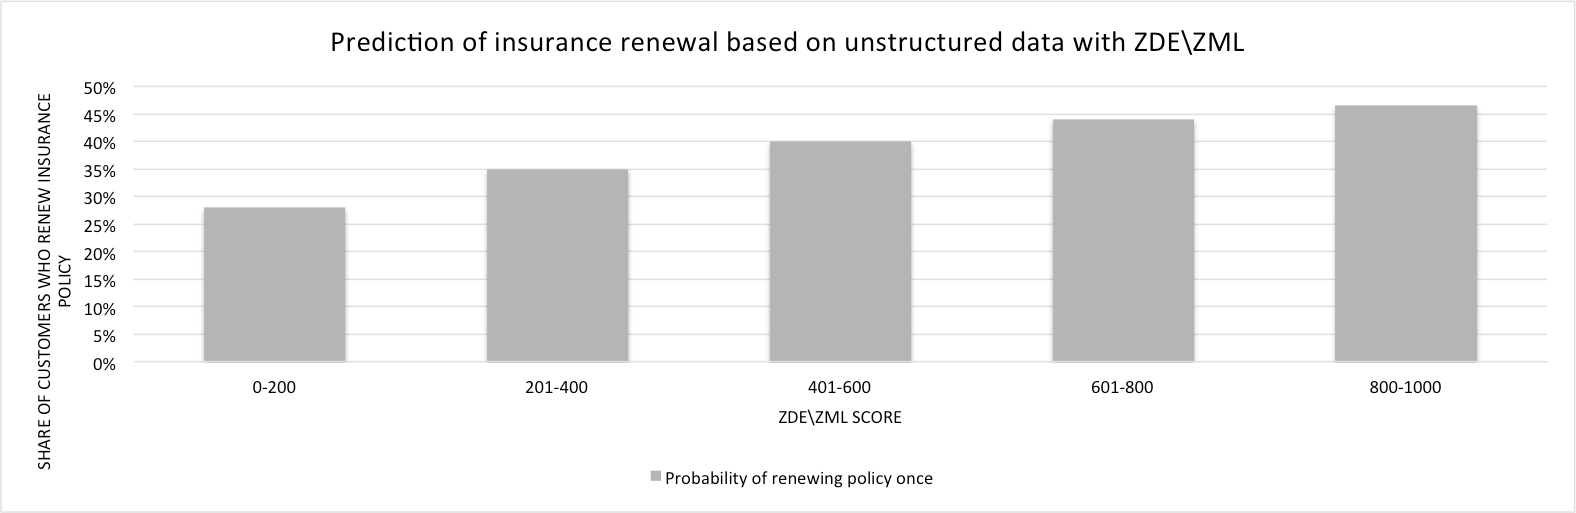 Prediction of insurance renewal based on unstructured data with ZDE/ZML